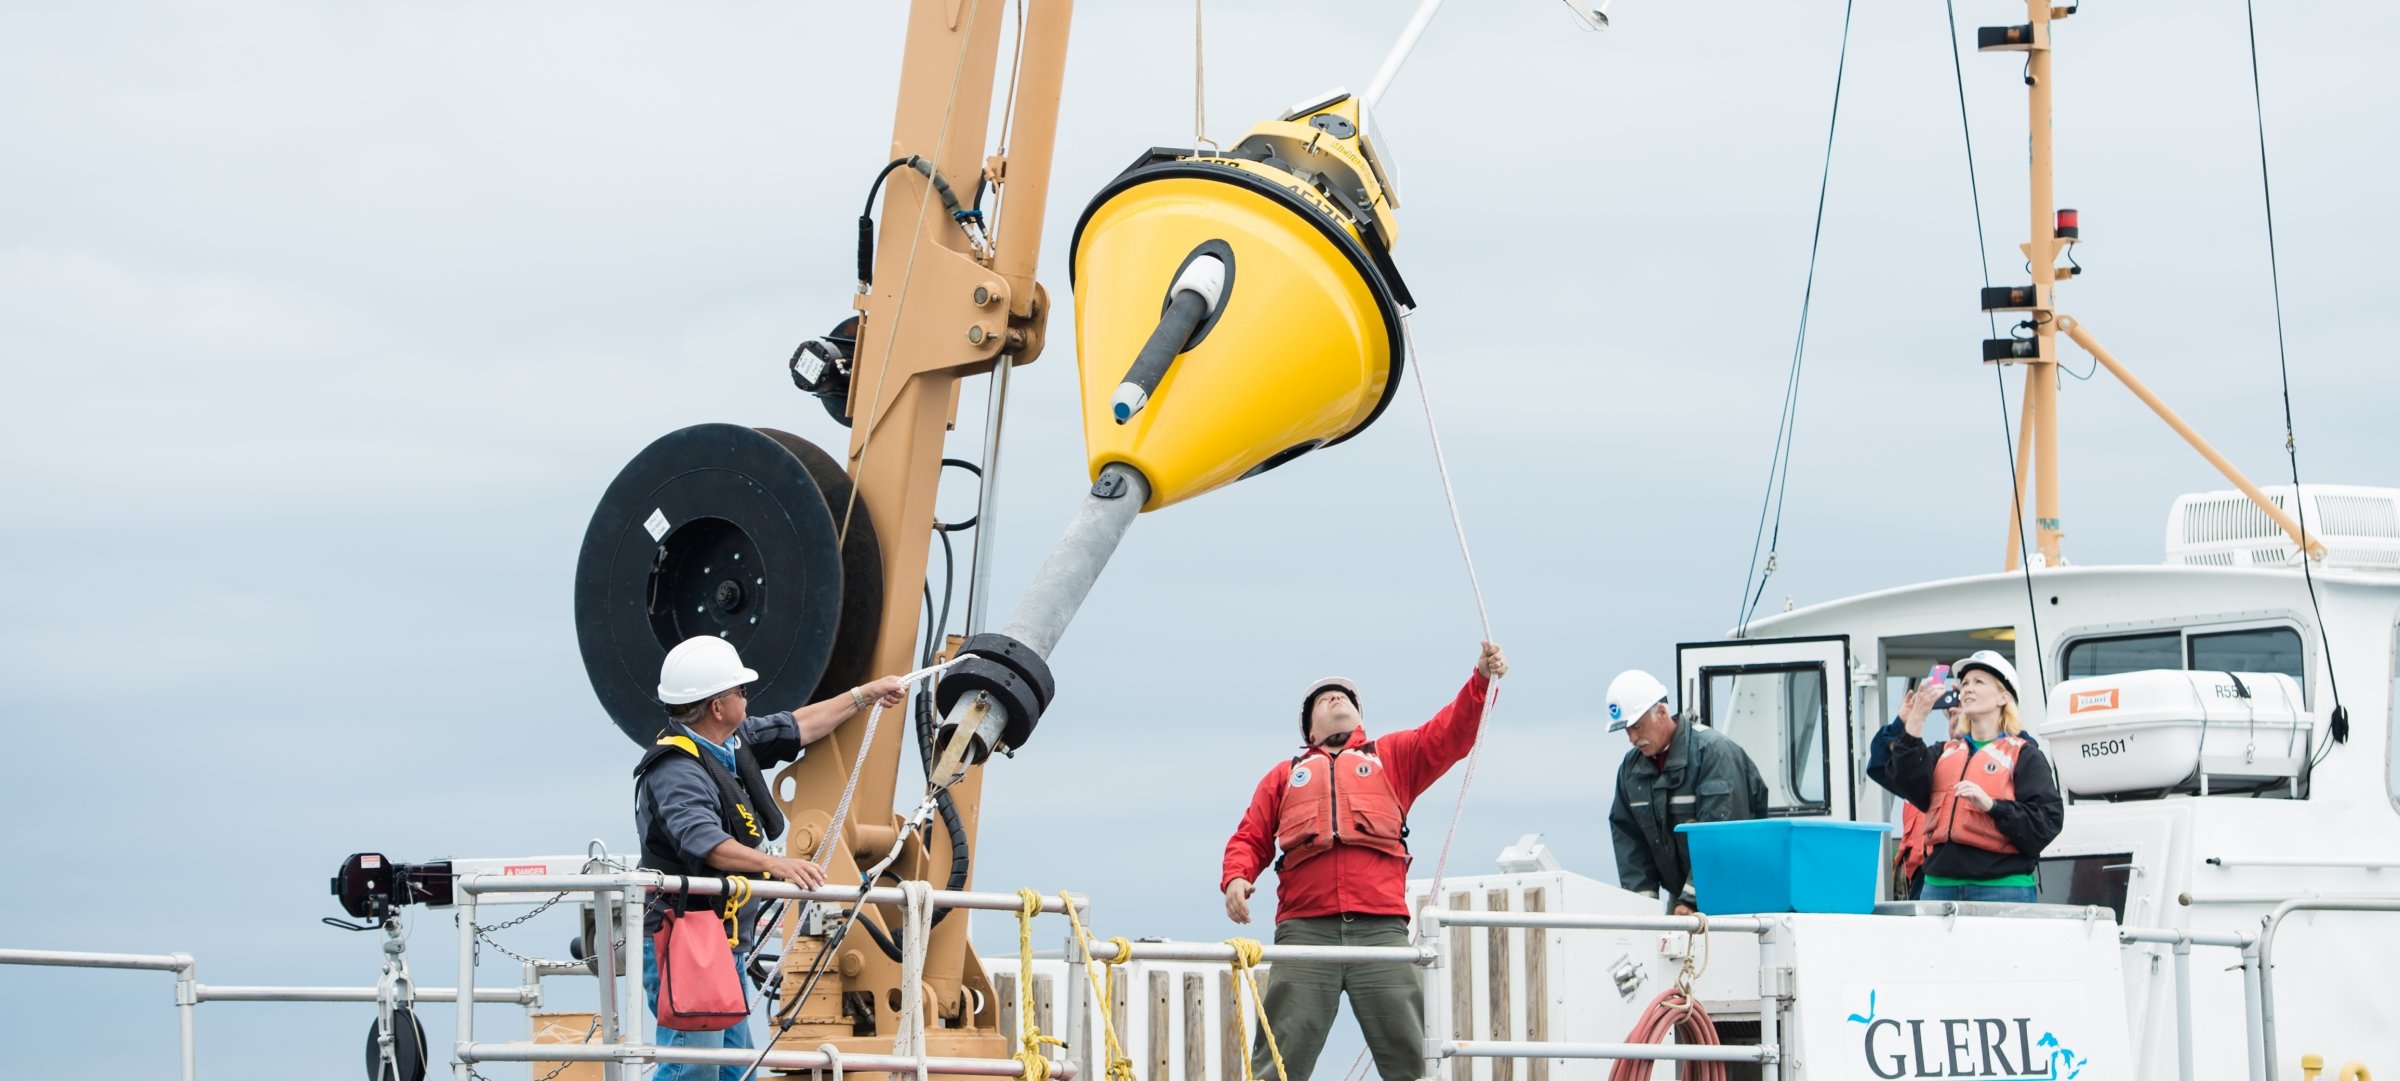 Buoy being deployed from a ship